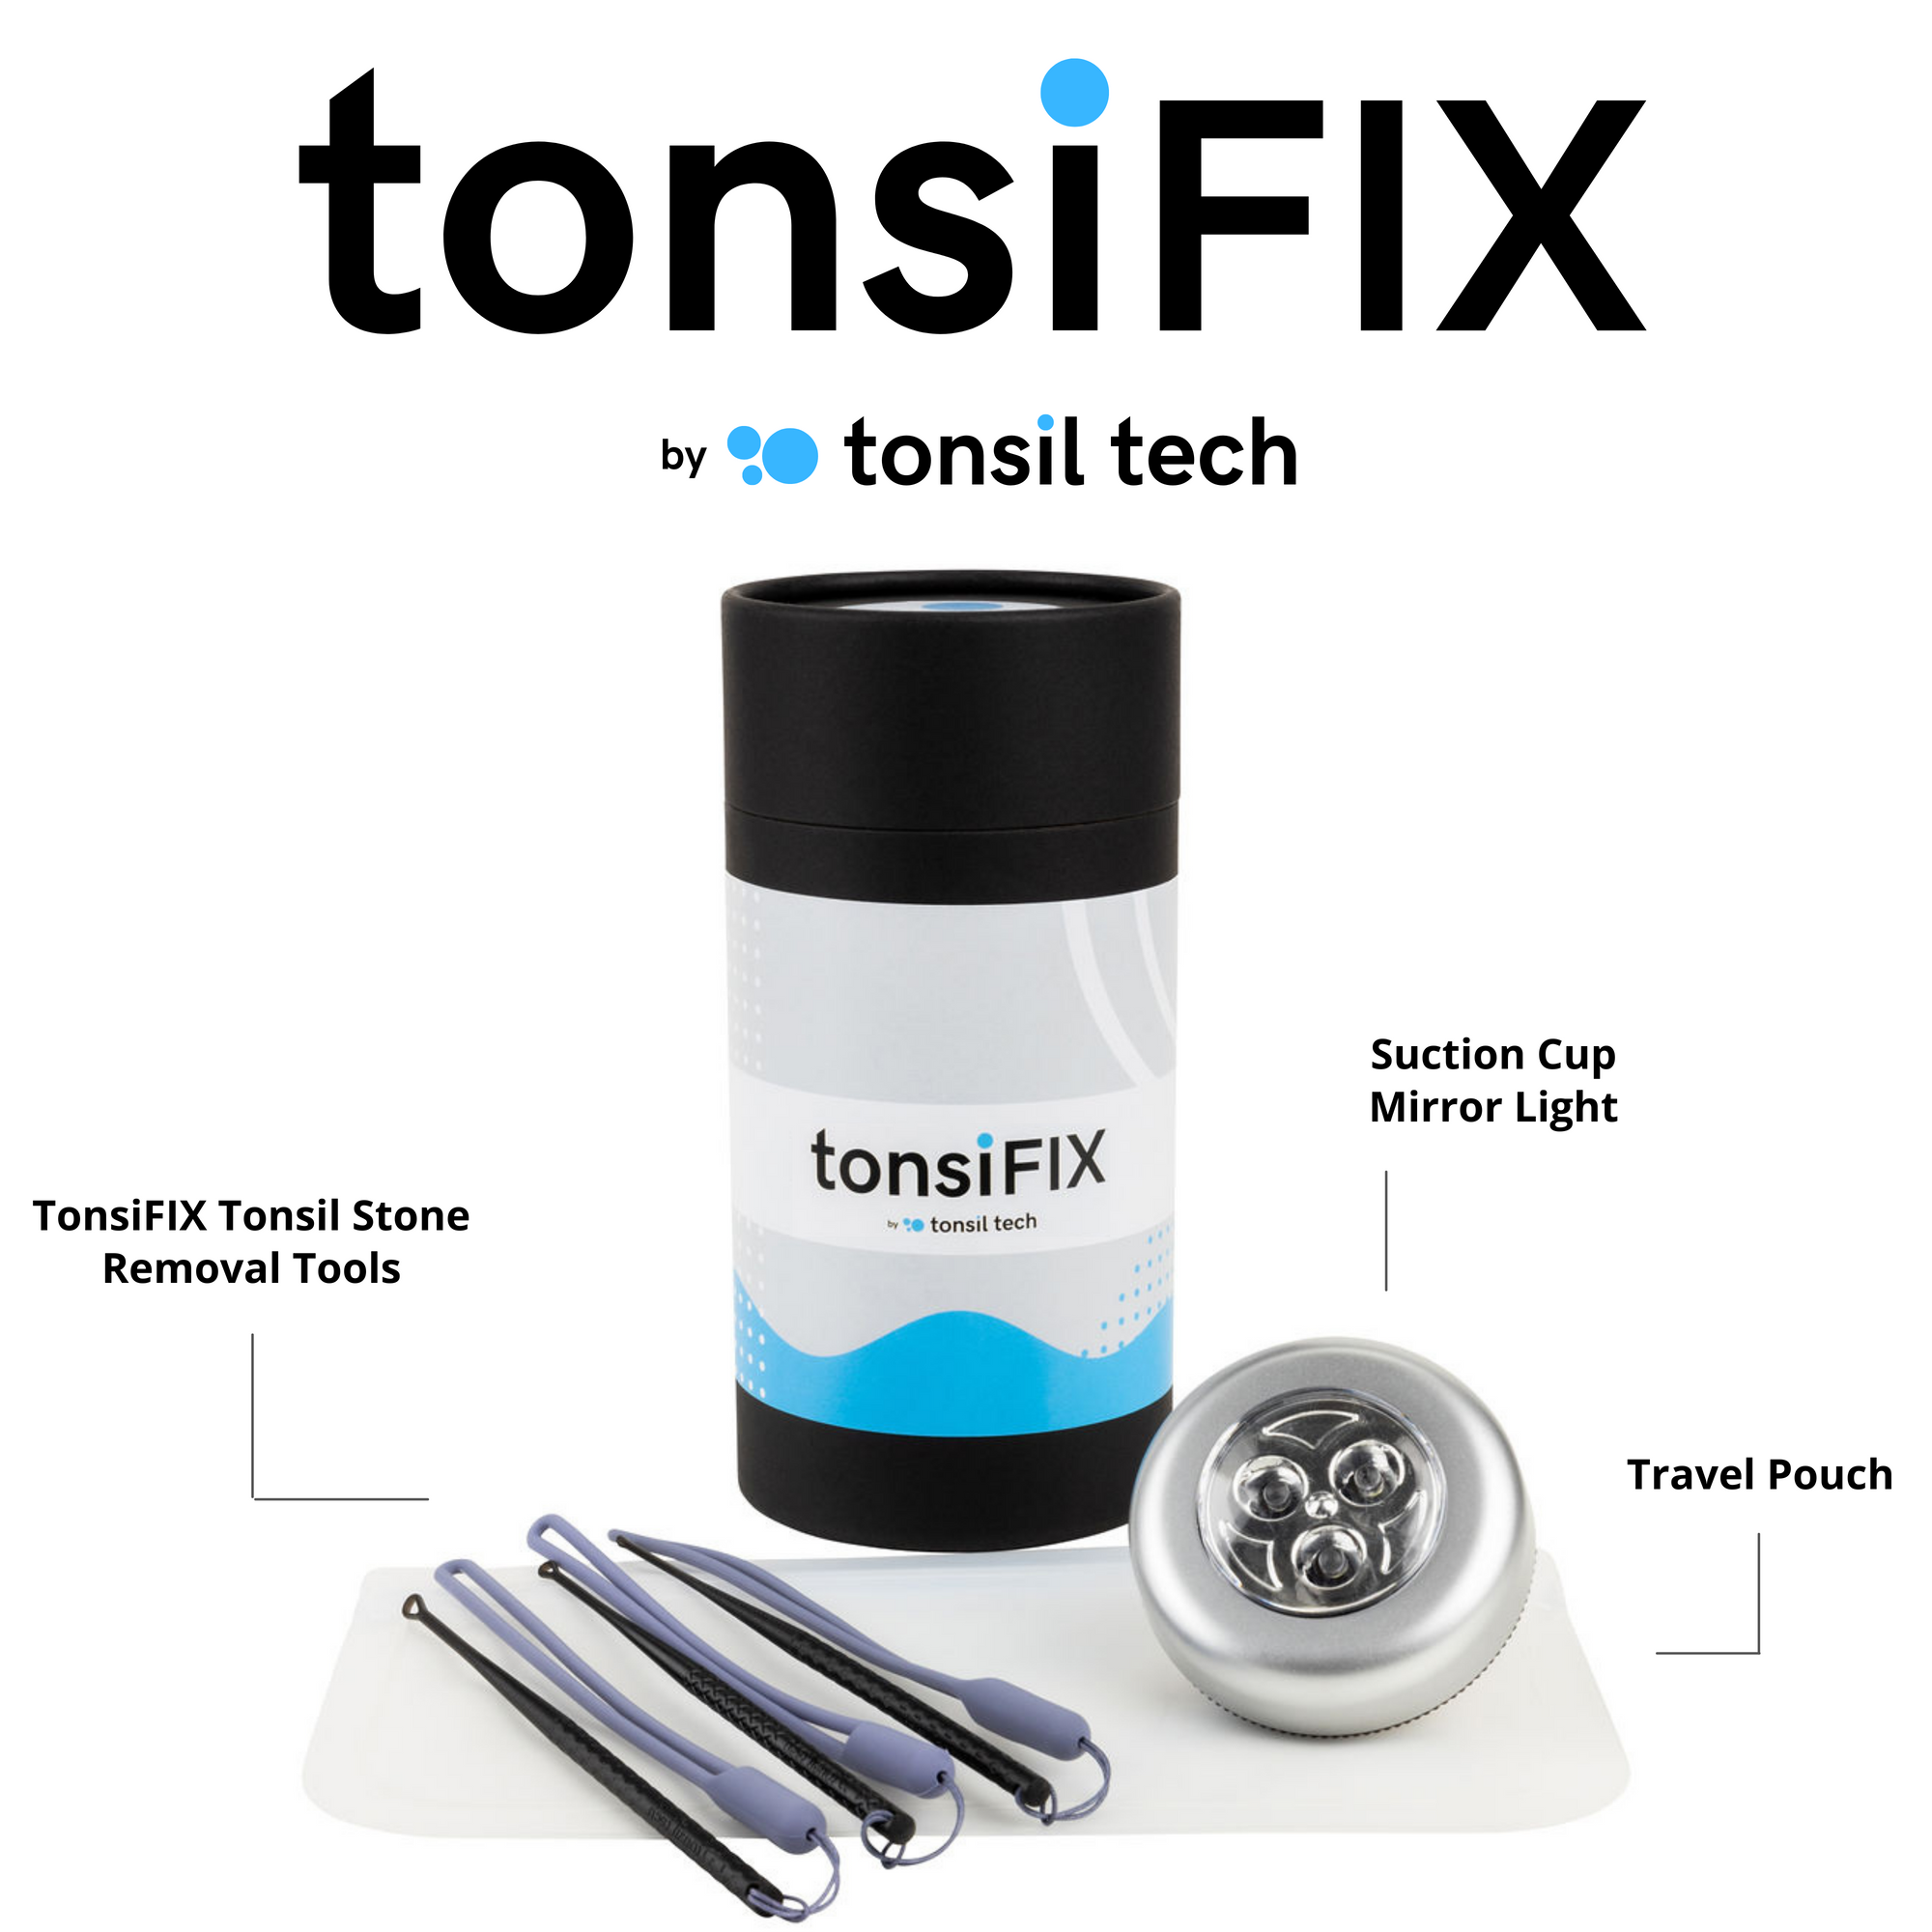 TonsiFIX Tonsil Stone Removal Kit by Tonsil Tech. What's included